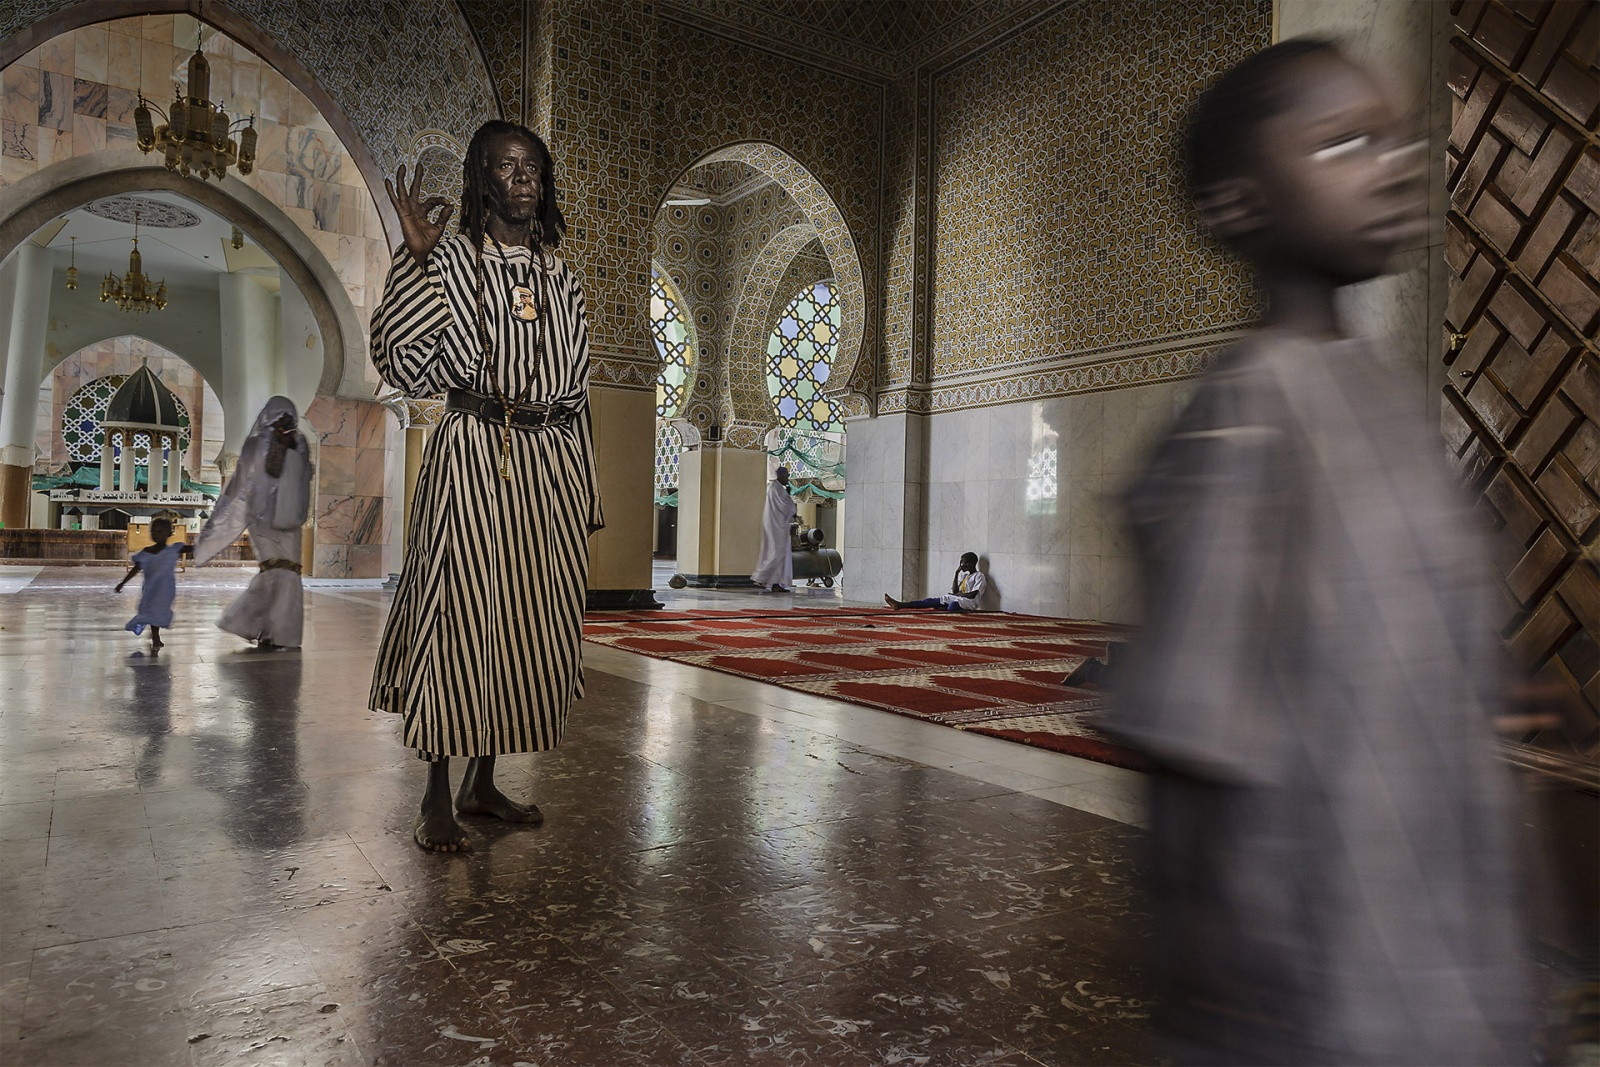 Great Mosque of Touba, Senegal 2016 - From Portfolio of the Travel Photographer of the Year 2018 - Overall Winner
Honorable mention Category People, Lifestule ipa - INTERNATIONAL PHOTO AWARD - New York 2020